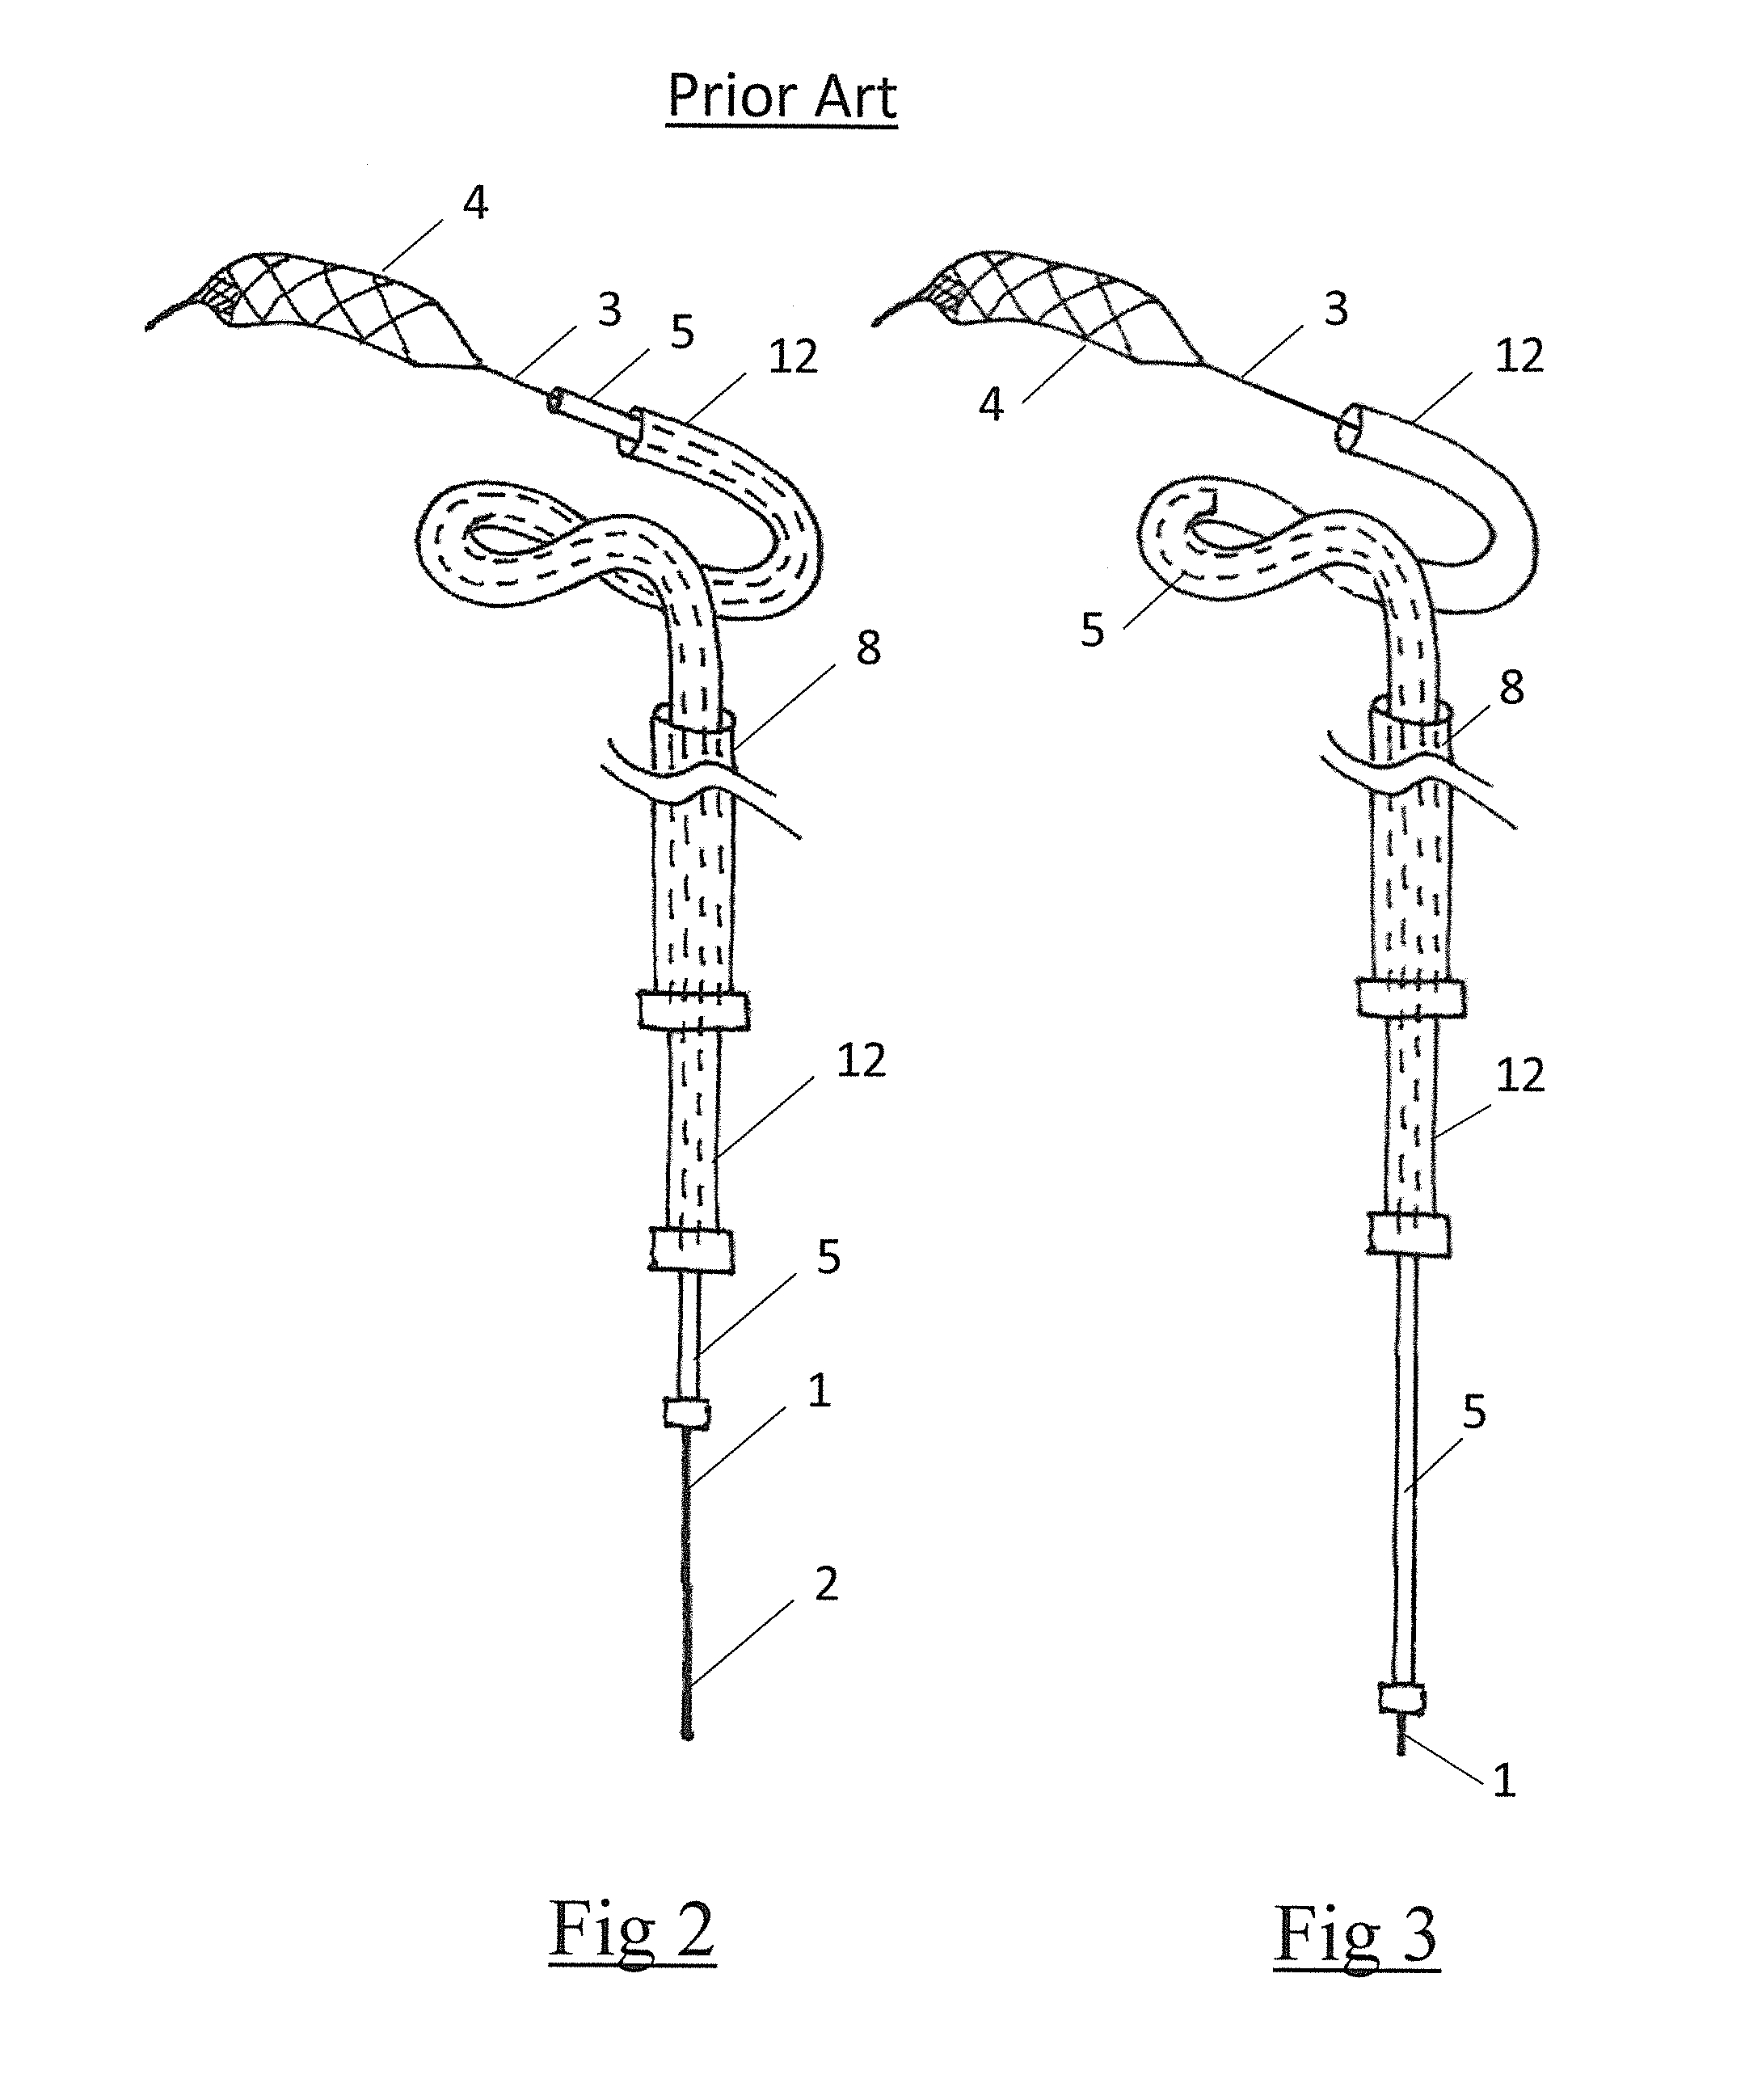 Clot retrieval system for removing occlusive clot from a blood vessel